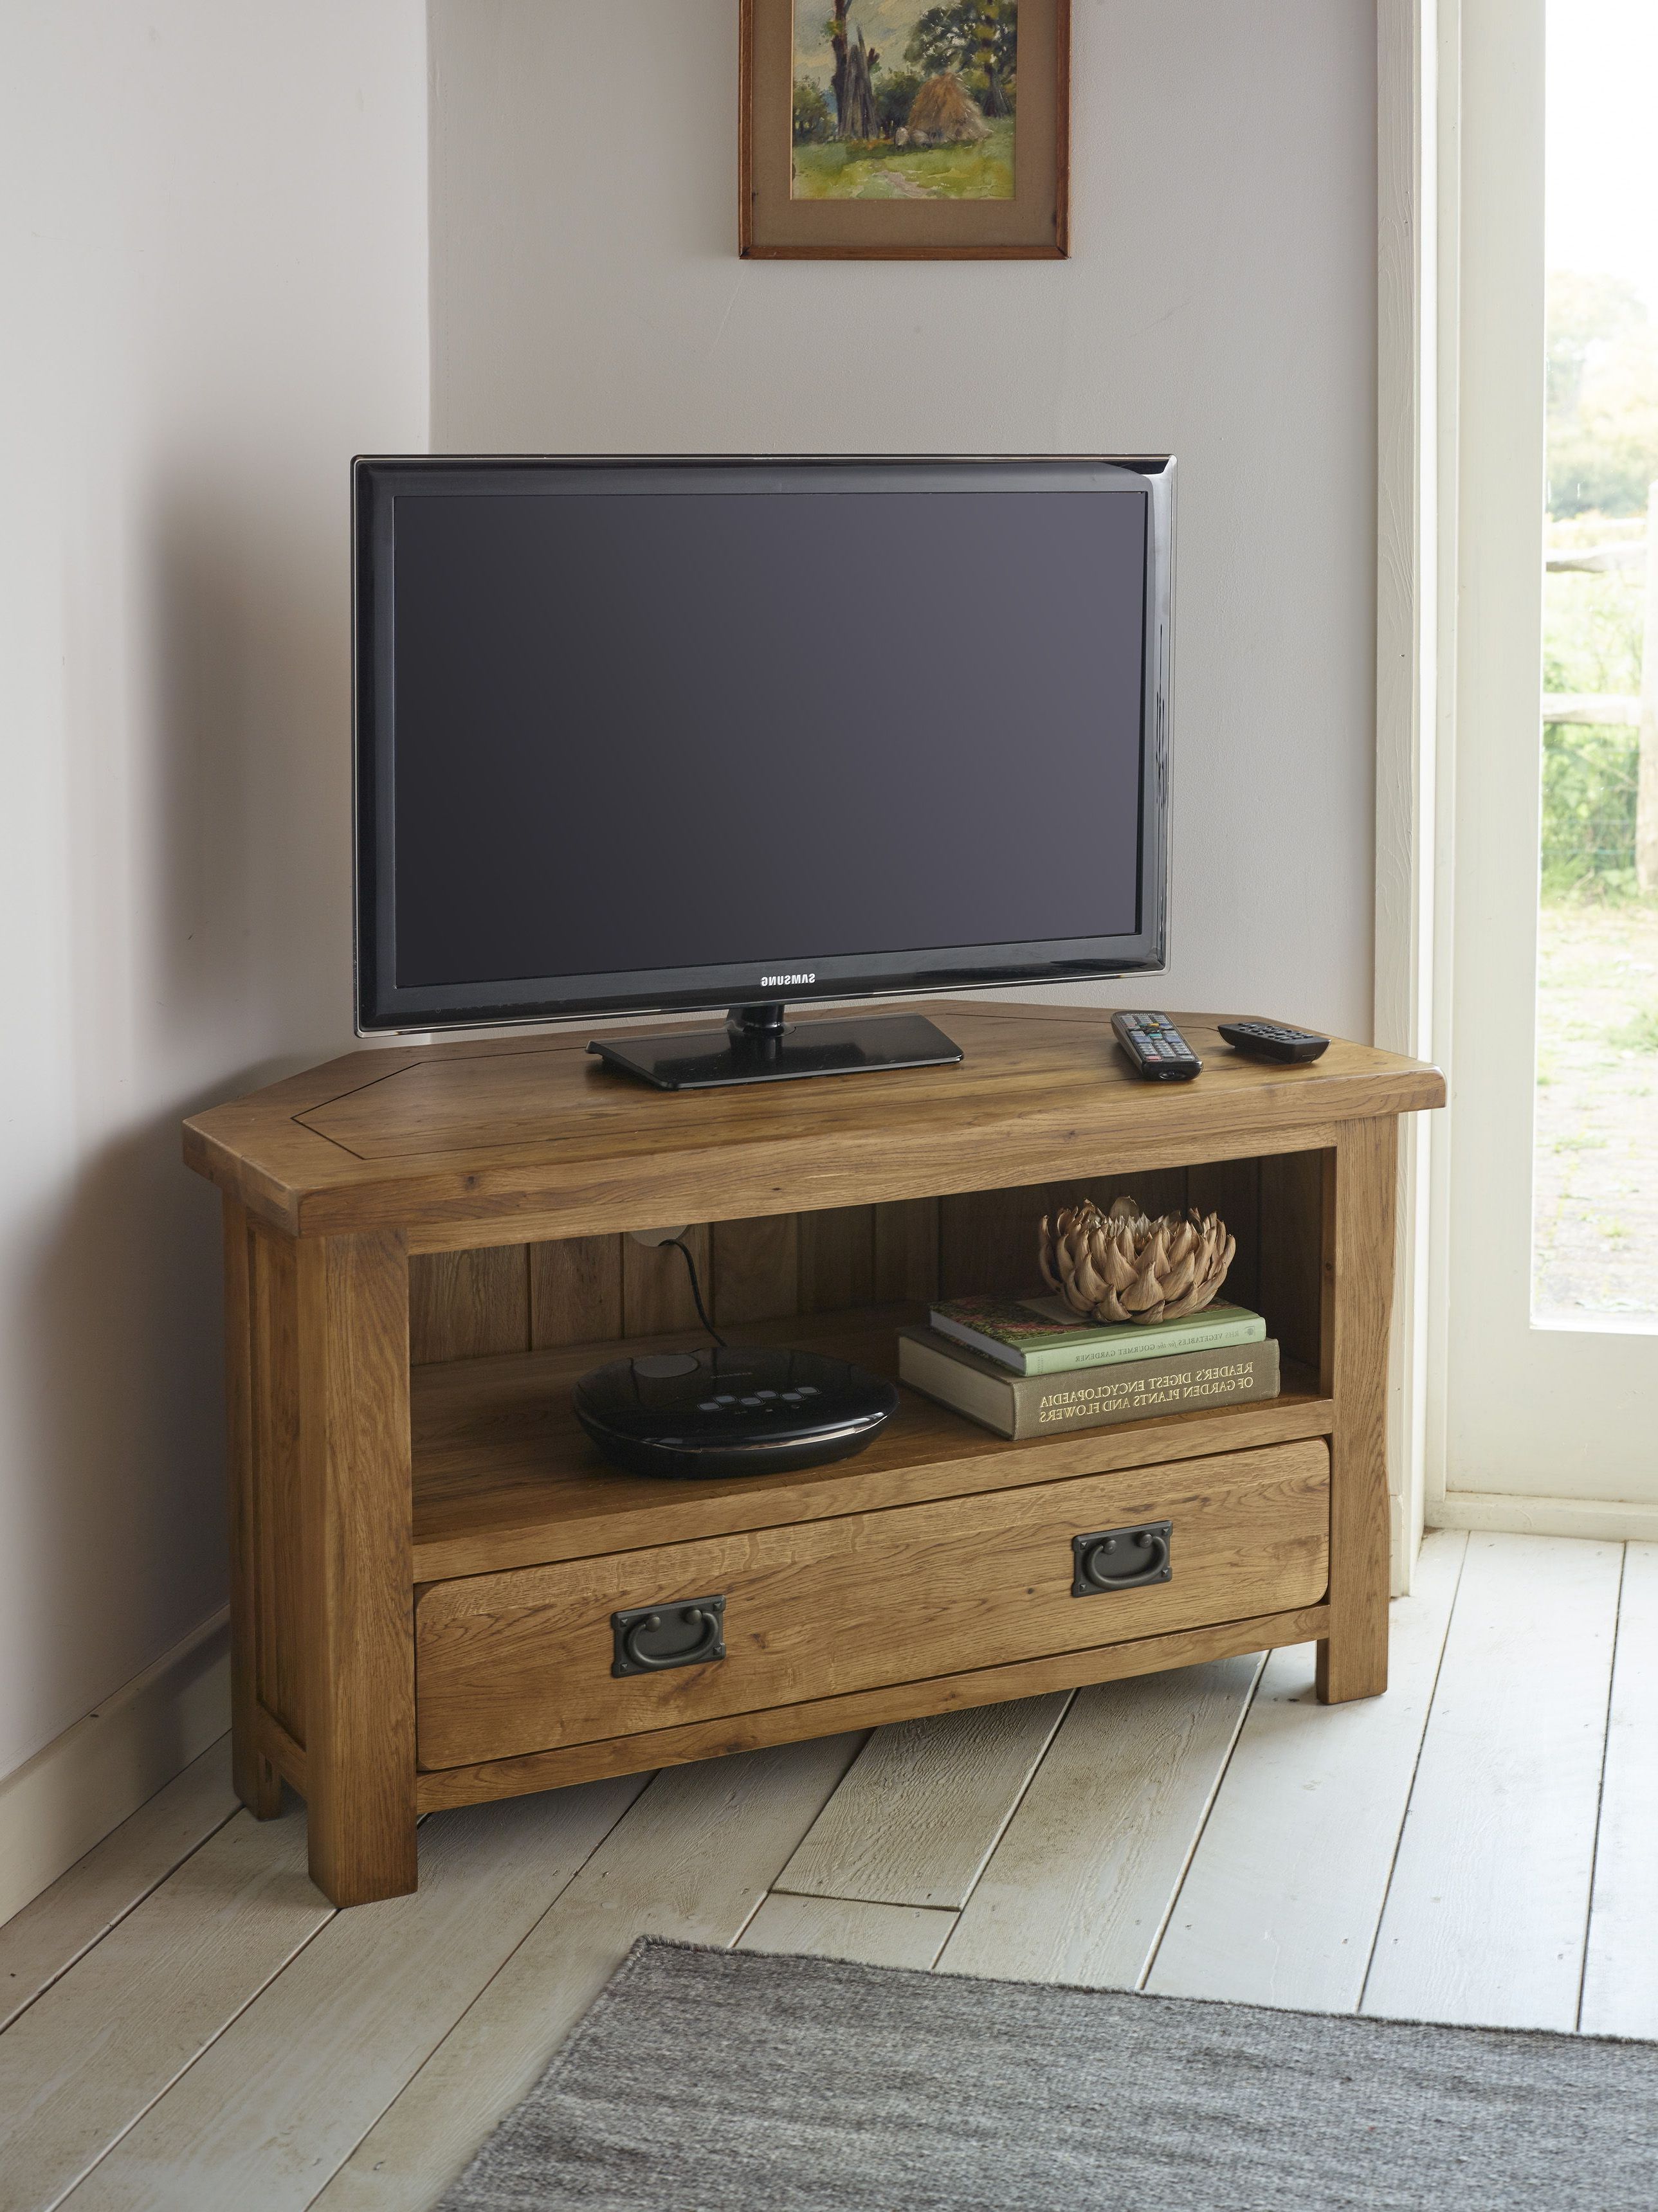 Solid Wood Corner Tv Cabinets Regarding 2018 Handcrafted From A Grade Solid Oak, The Original Rustic Solid Oak (View 6 of 20)